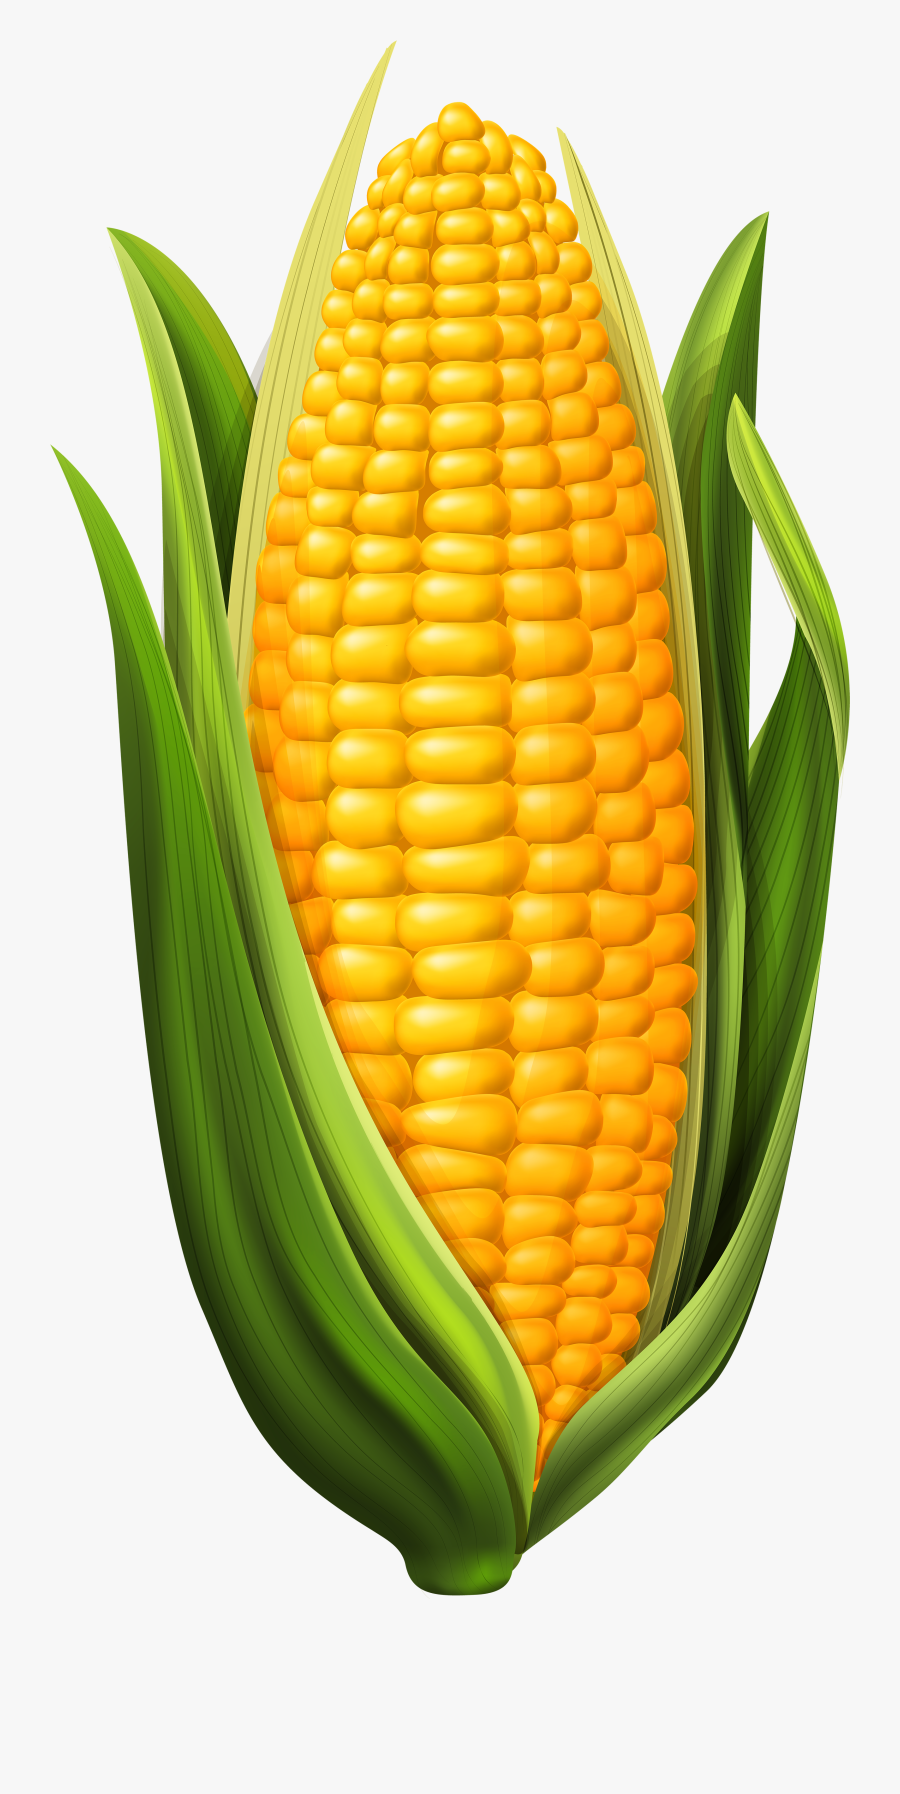 Corn Clipart Canned - Clipart Corn On The Cob, Transparent Clipart